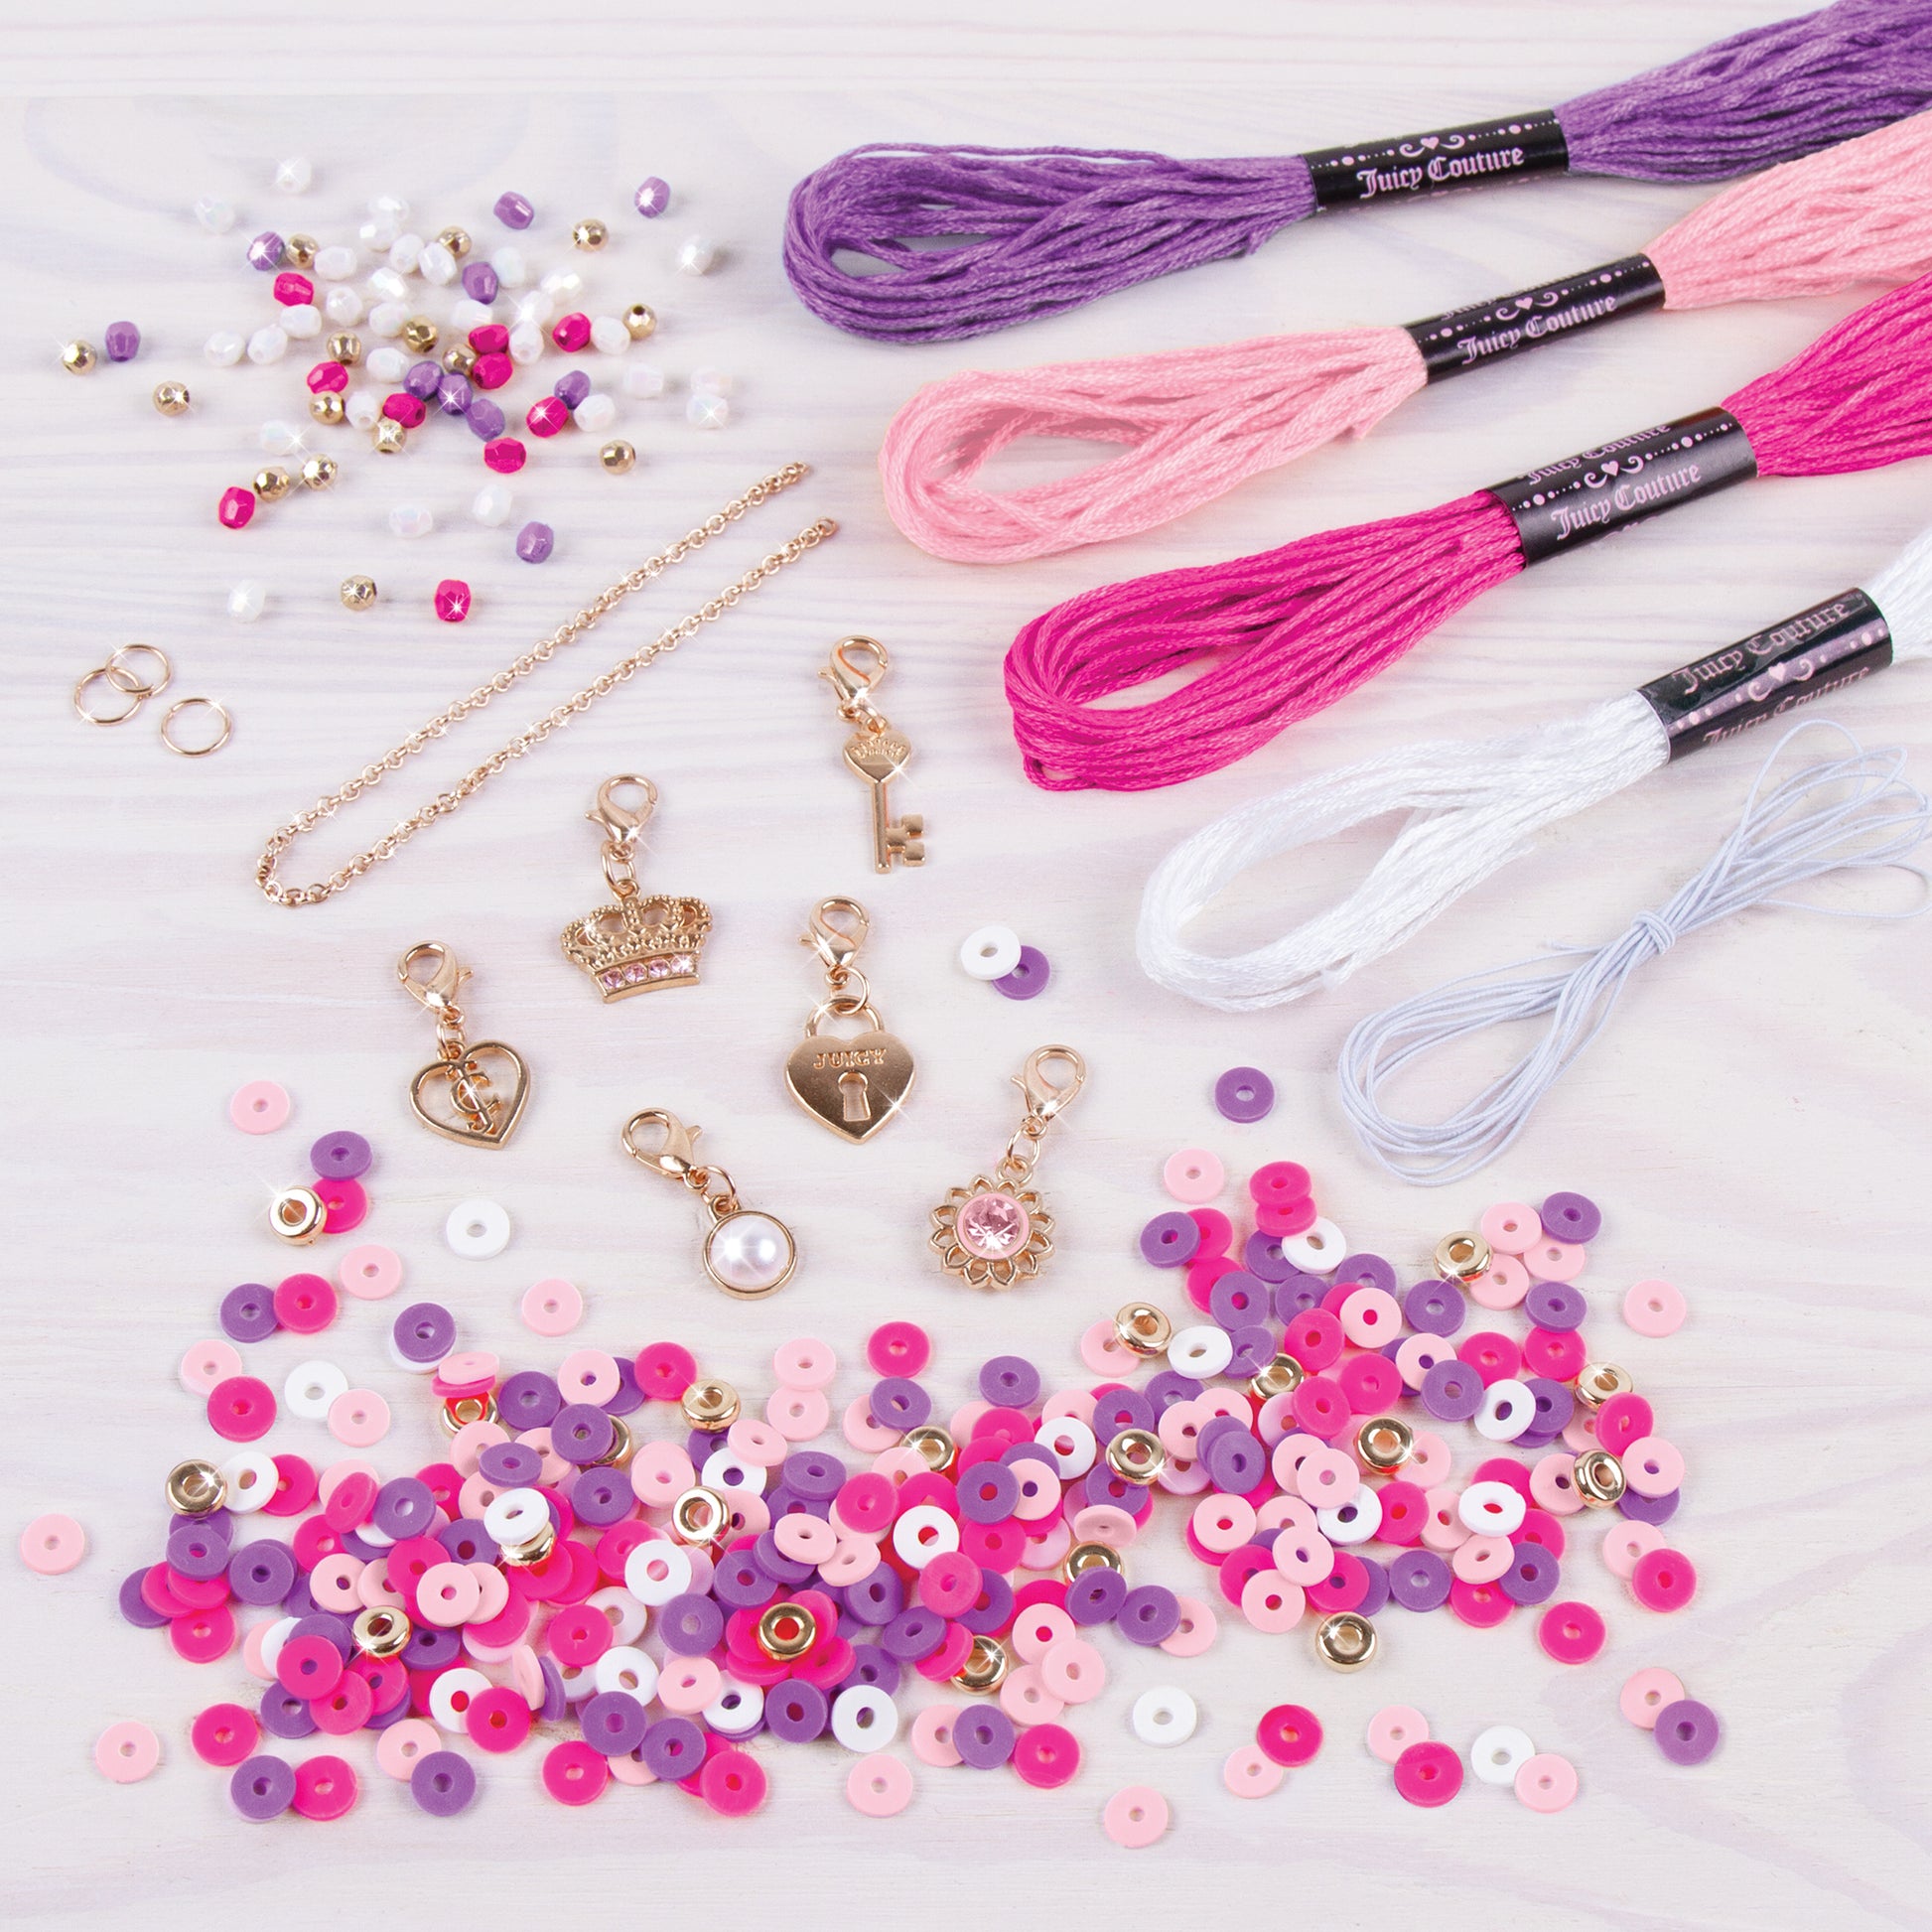 Make It Real - Juicy Couture Absolutely Charming Bracelet Making Kit 4480